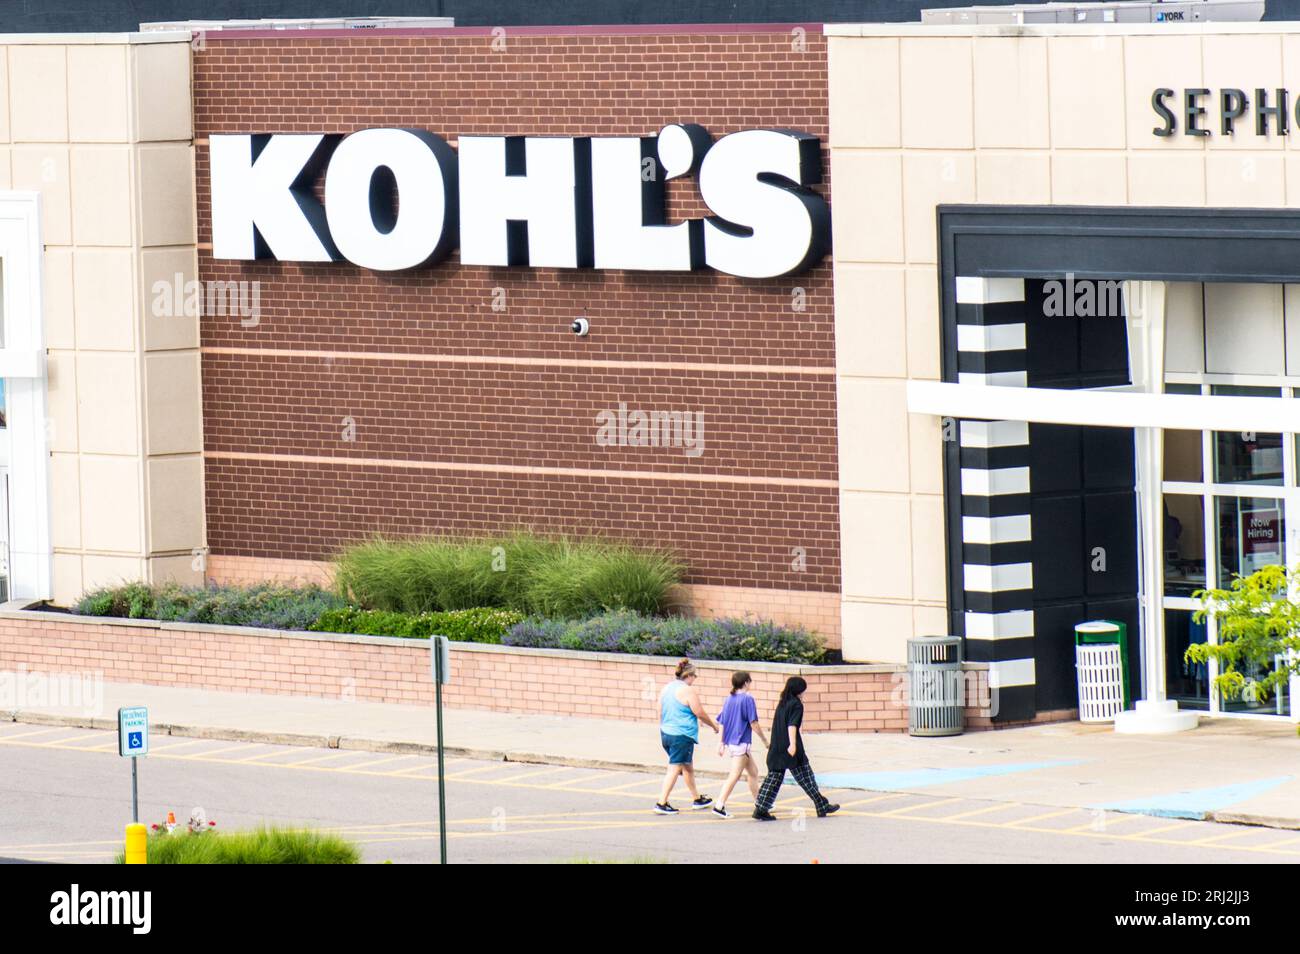 Kohl's Department store front. Kohl's is the largest deparmental store ...